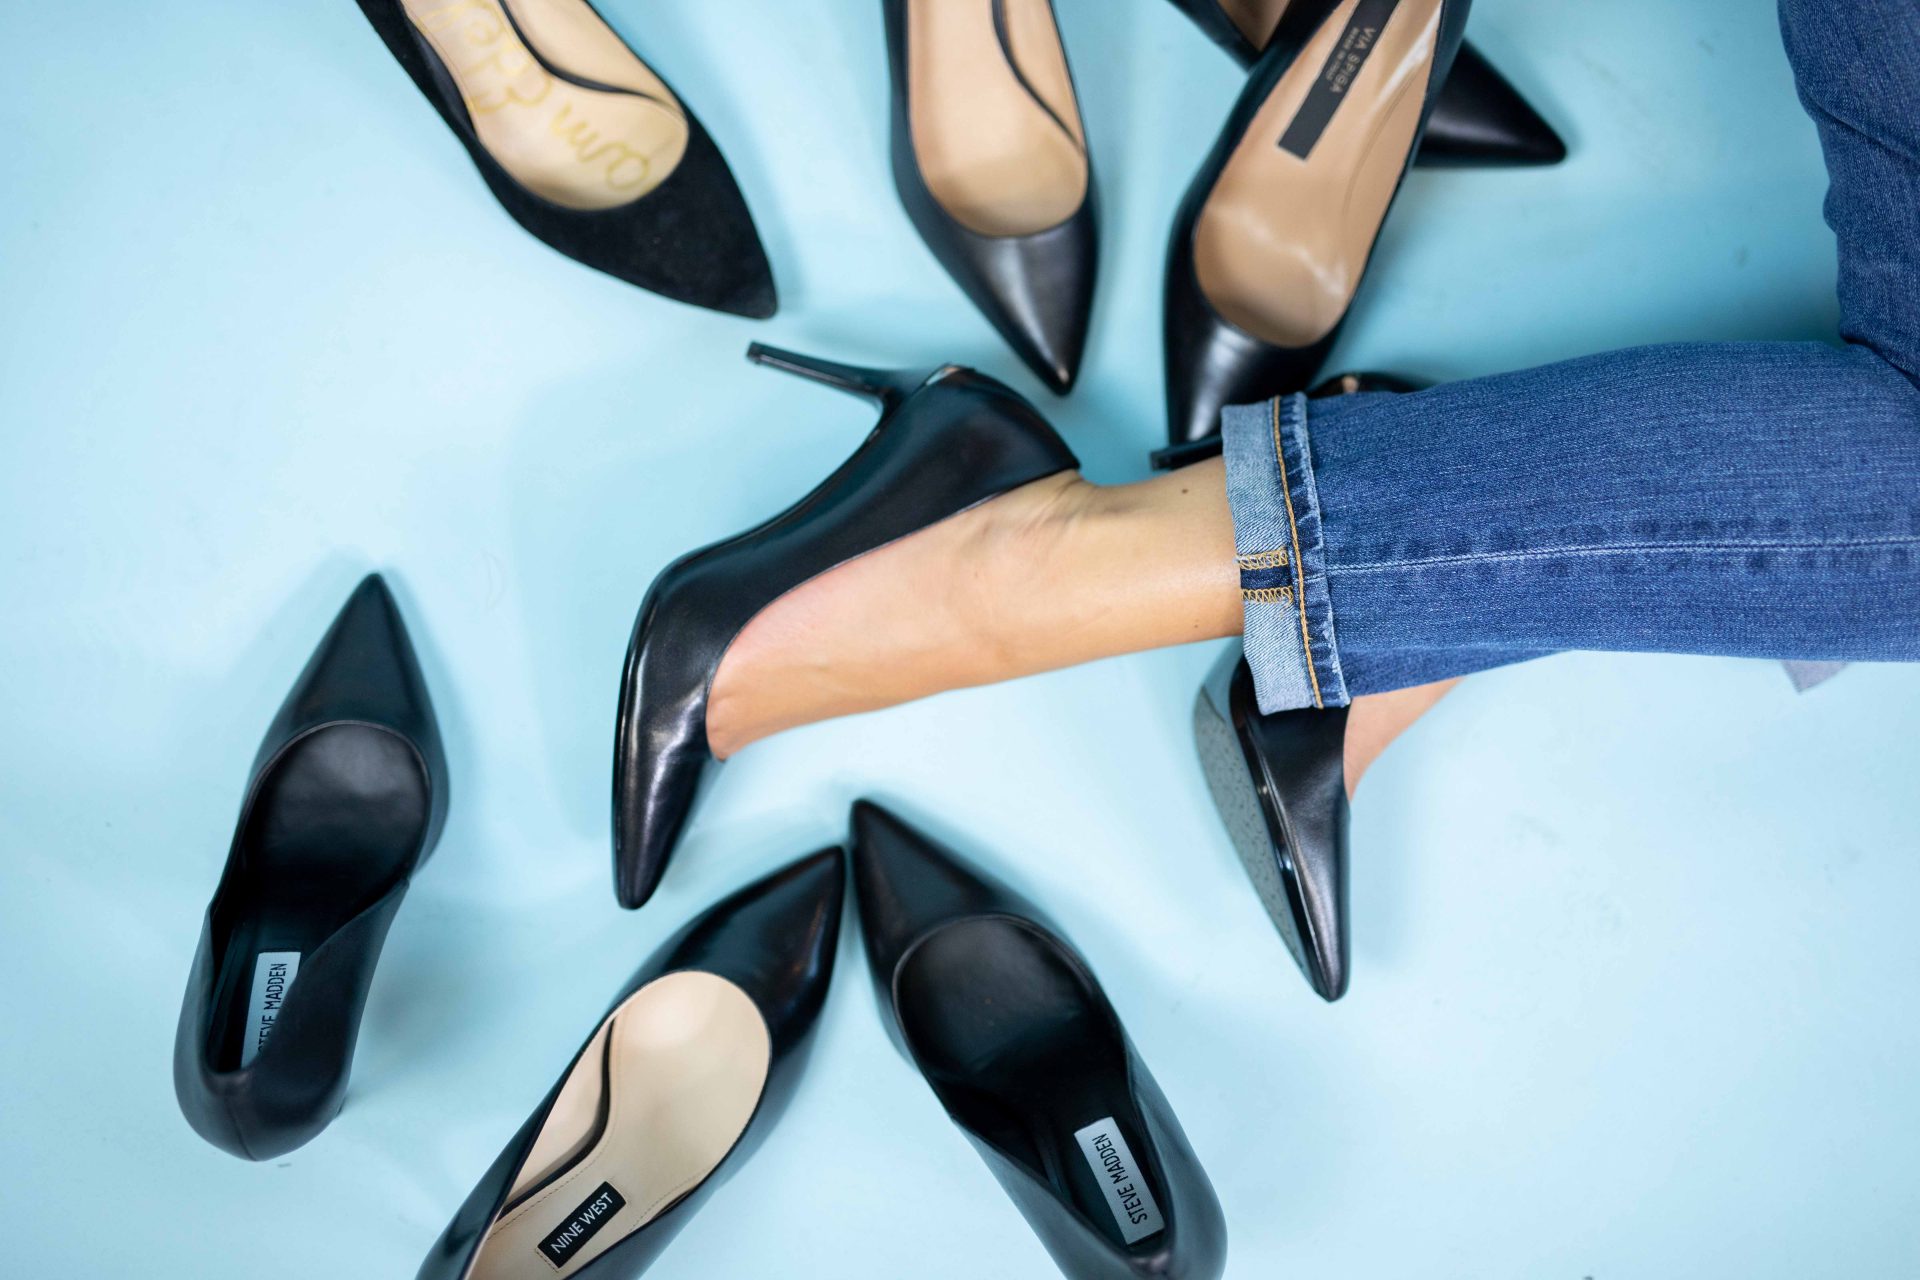 Found: The Best Black Pumps - Living in 